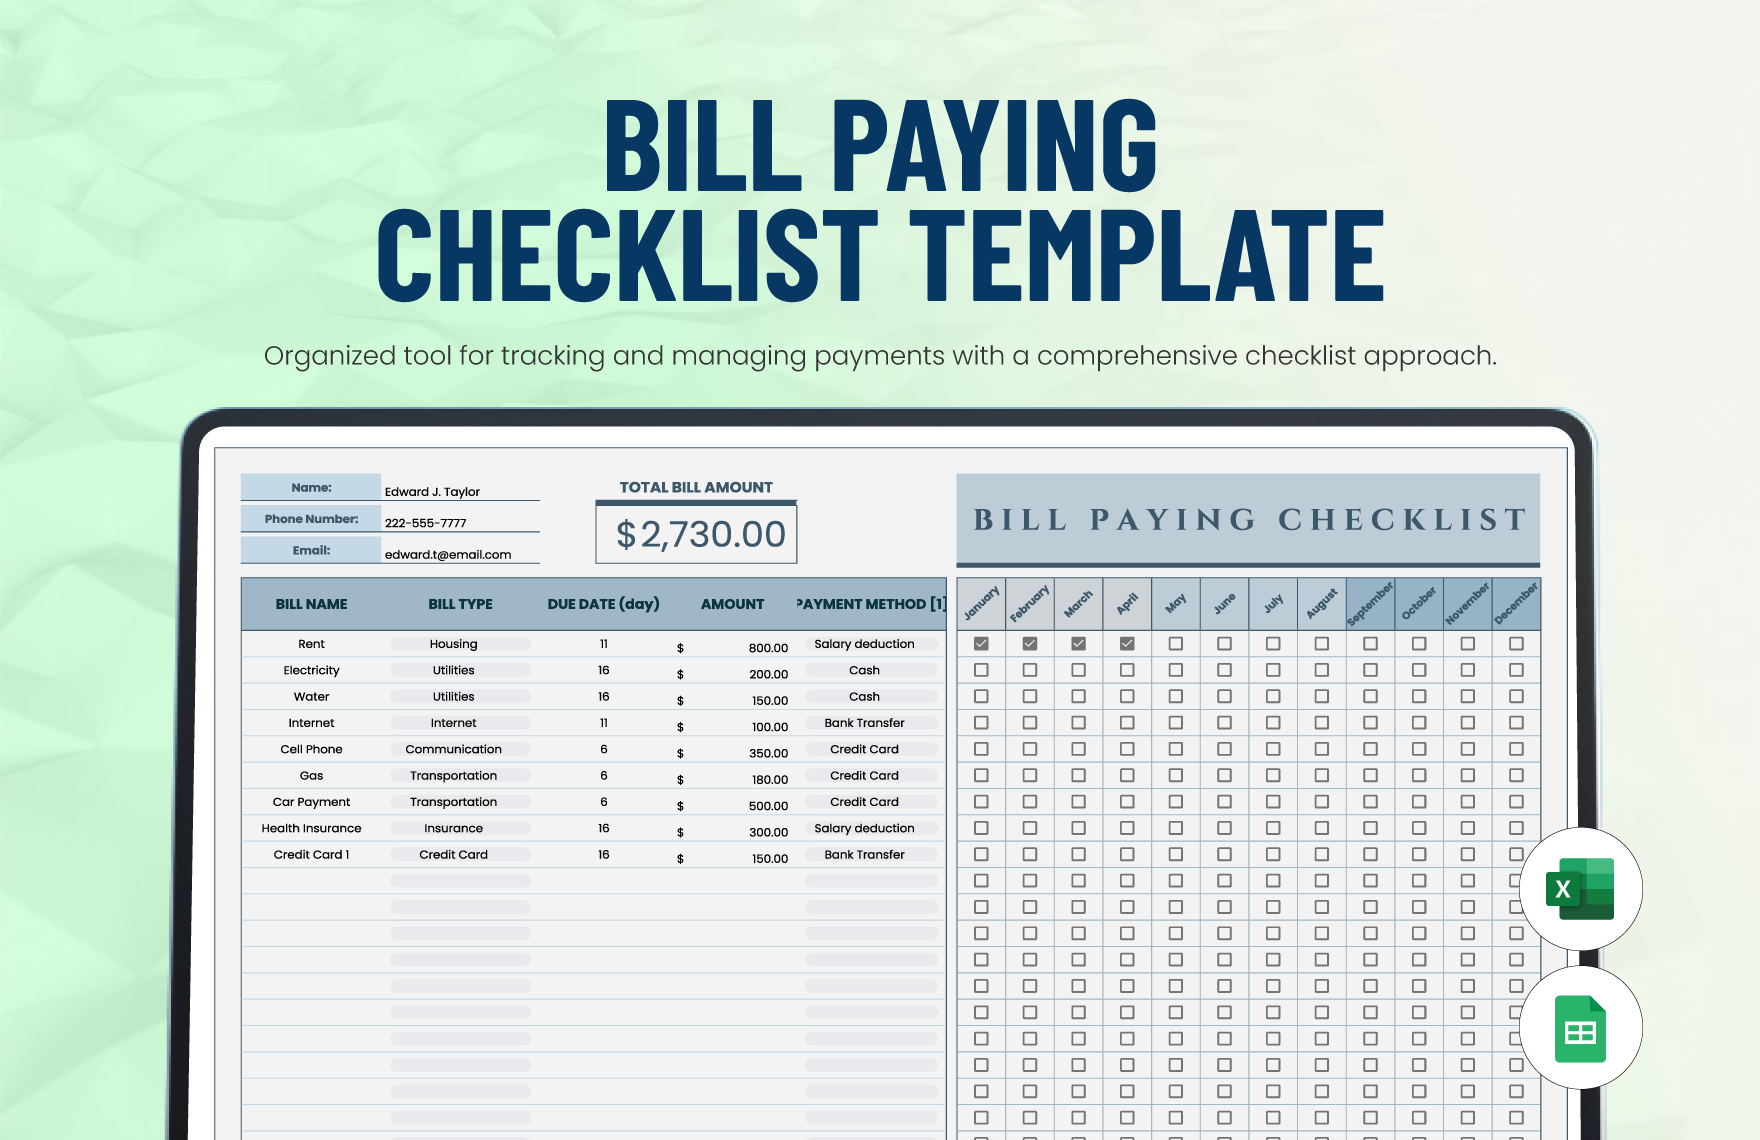 Free Bill Paying Checklist Template in Excel, Google Sheets